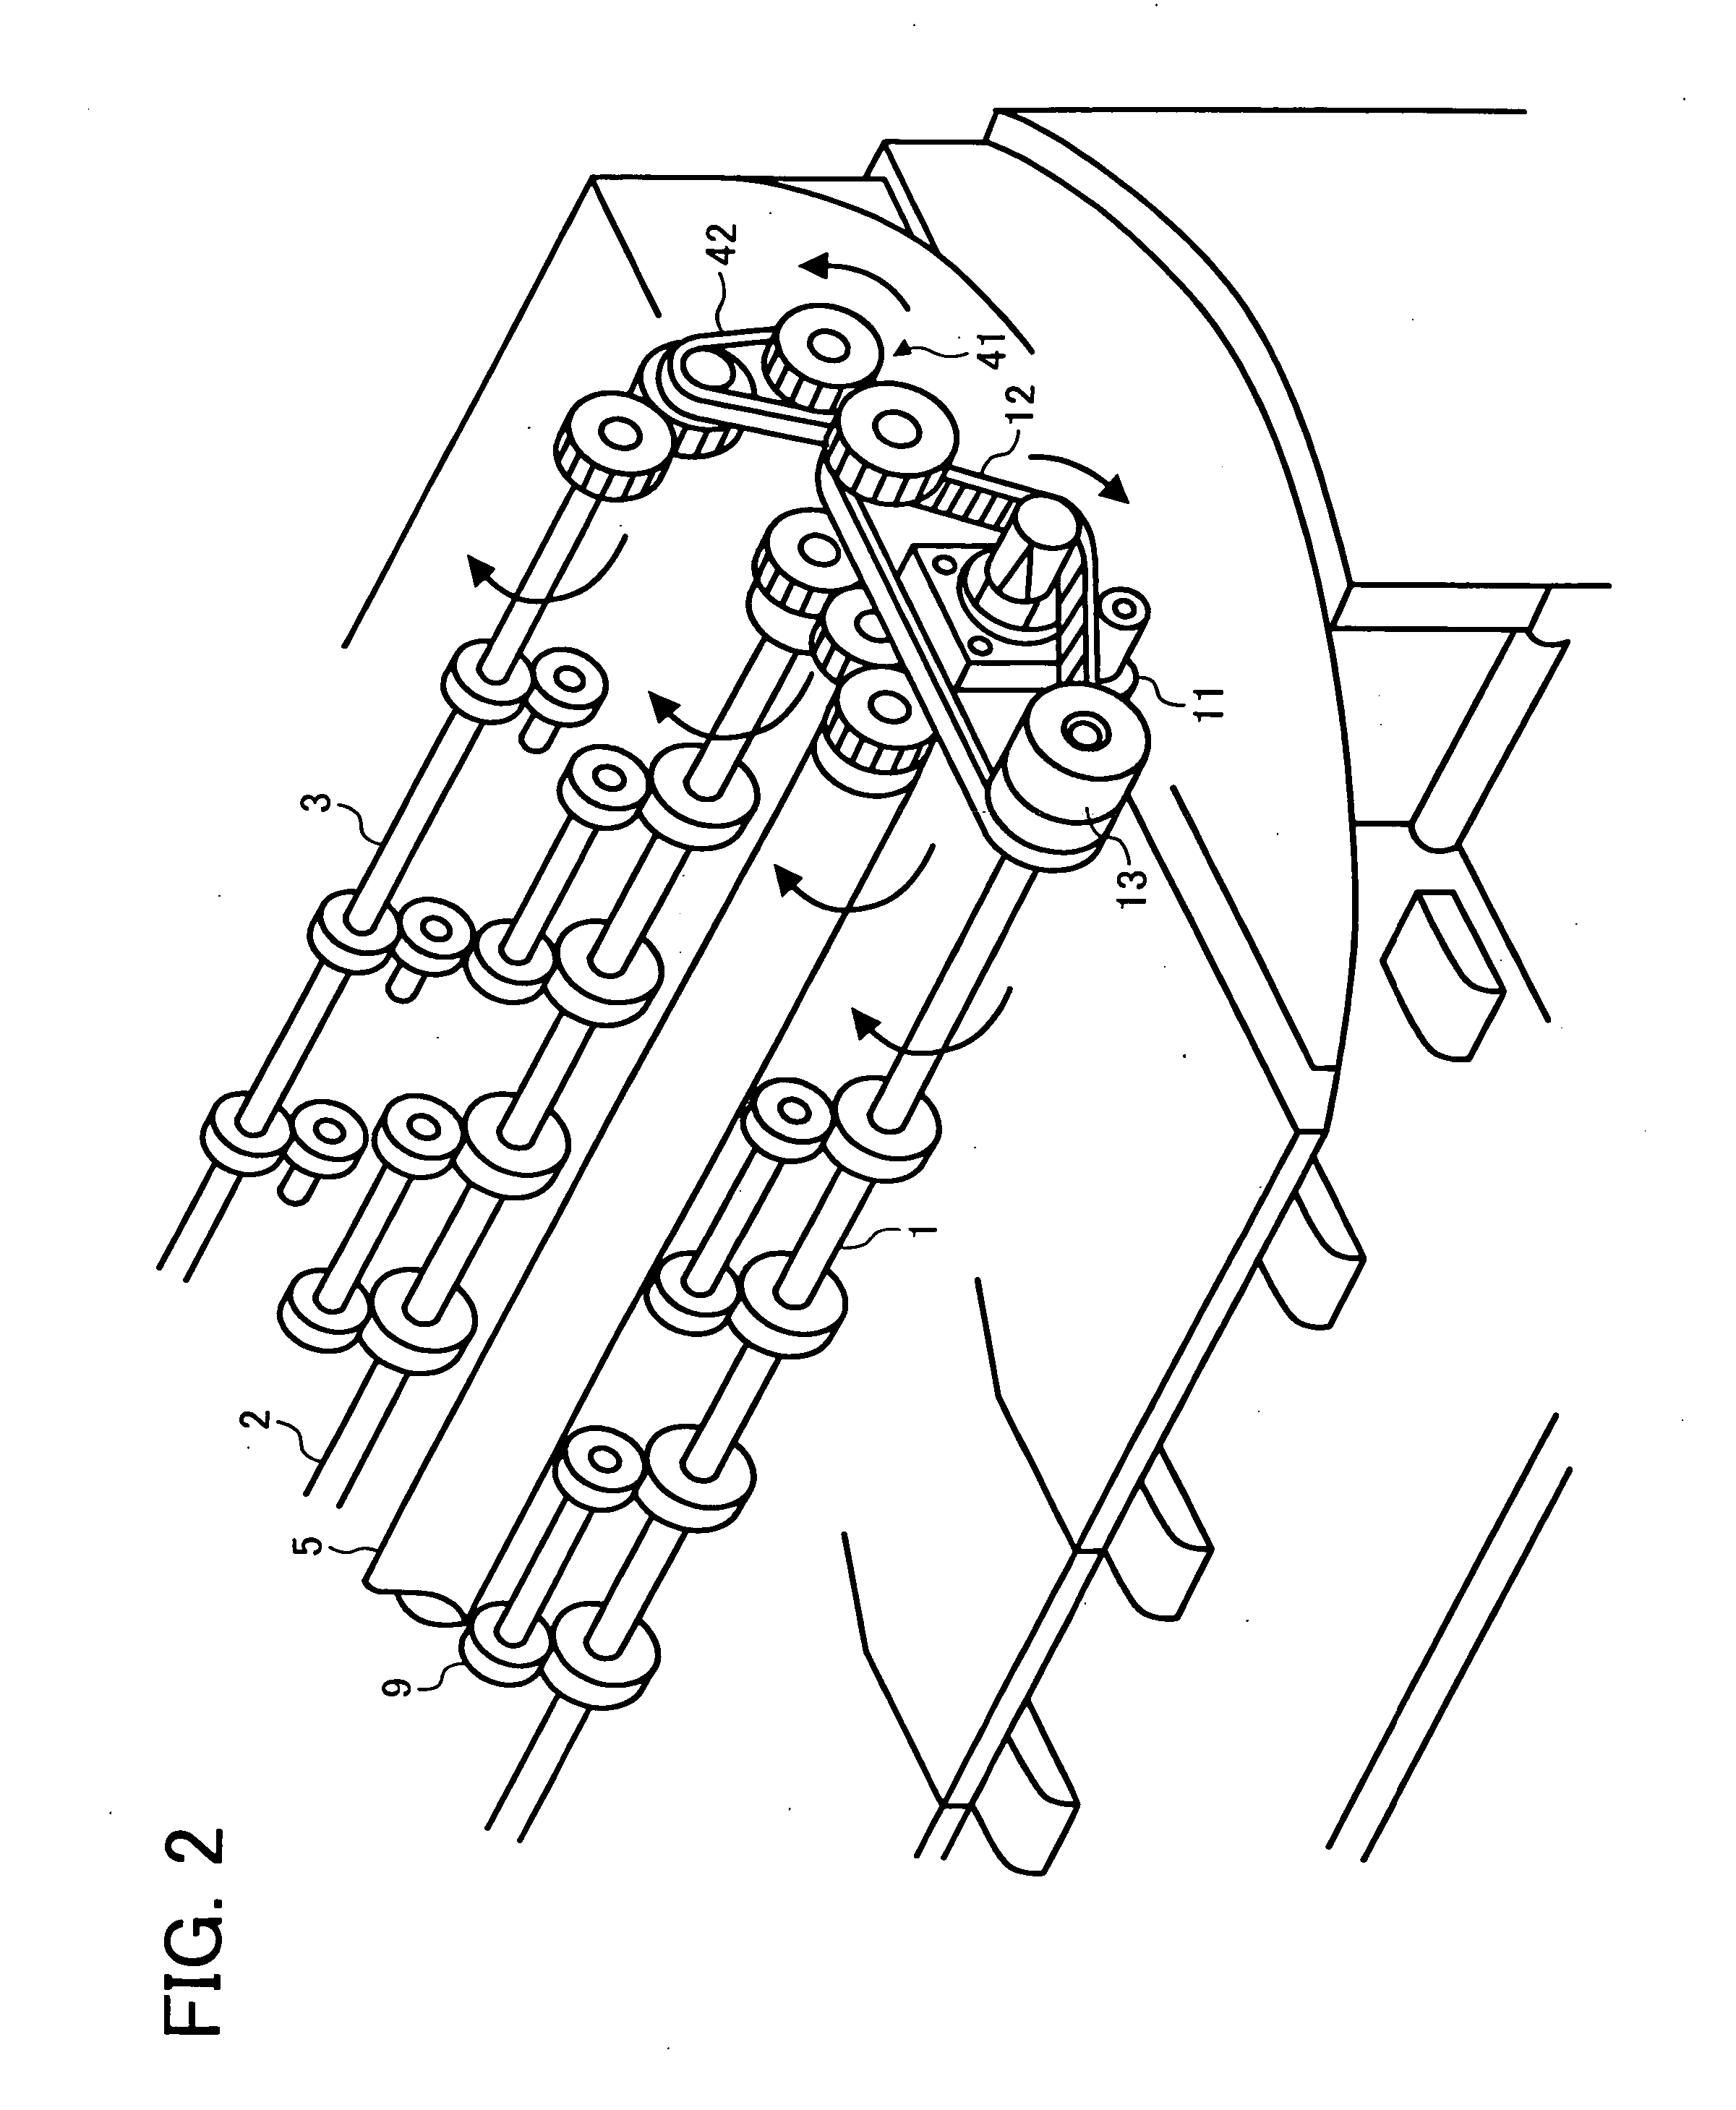 Document feeding and reading unit and image forming apparatus